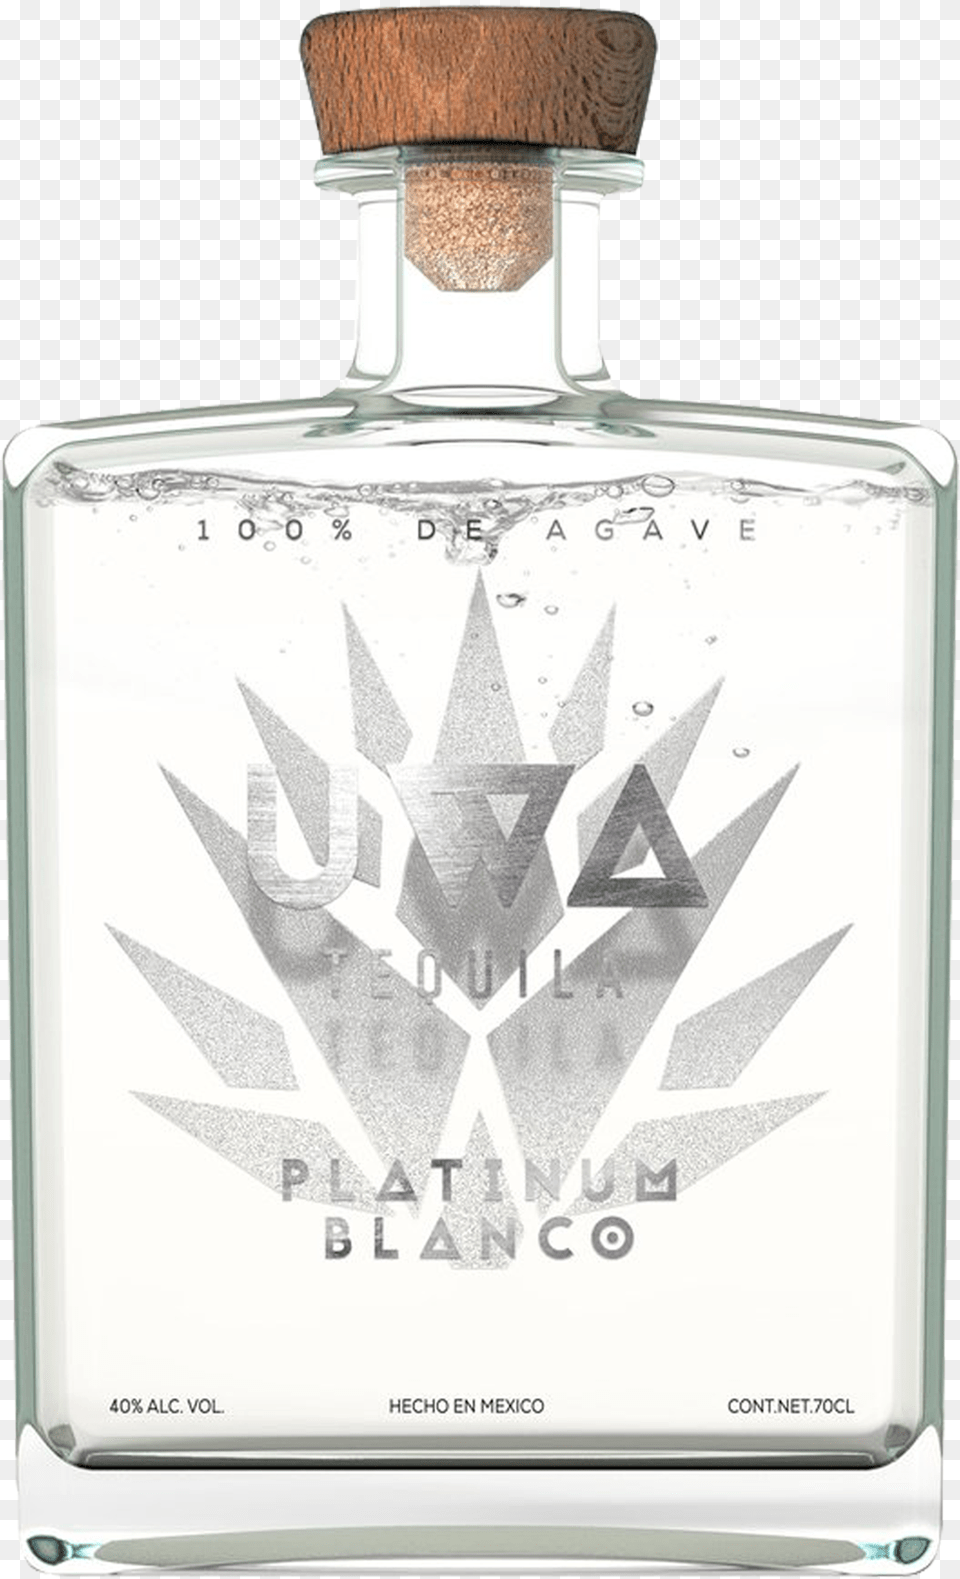 Class Lazyload Lazyload Fade In Cloudzoom Featured Uwa Tequila Platinum Blanco, Alcohol, Beverage, Liquor, Car Png Image